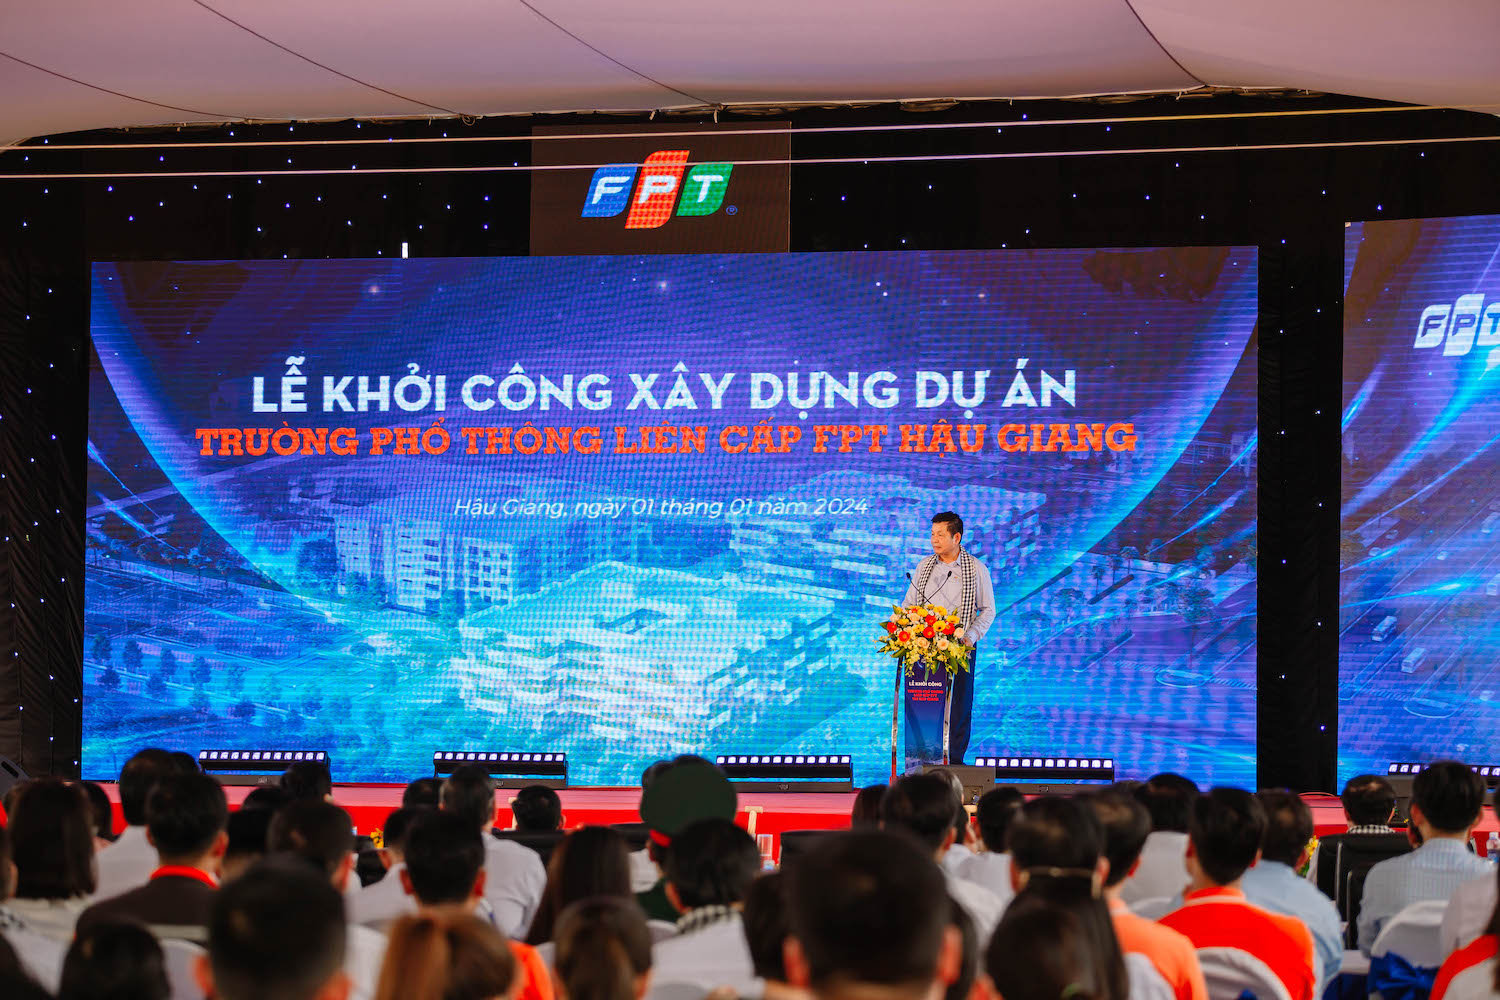 Chairman of FPT, Mr. Truong Gia Binh, has pledged that FPT Hau Giang Inter-Level School would emerge as a trailblazer in science and technology education for students